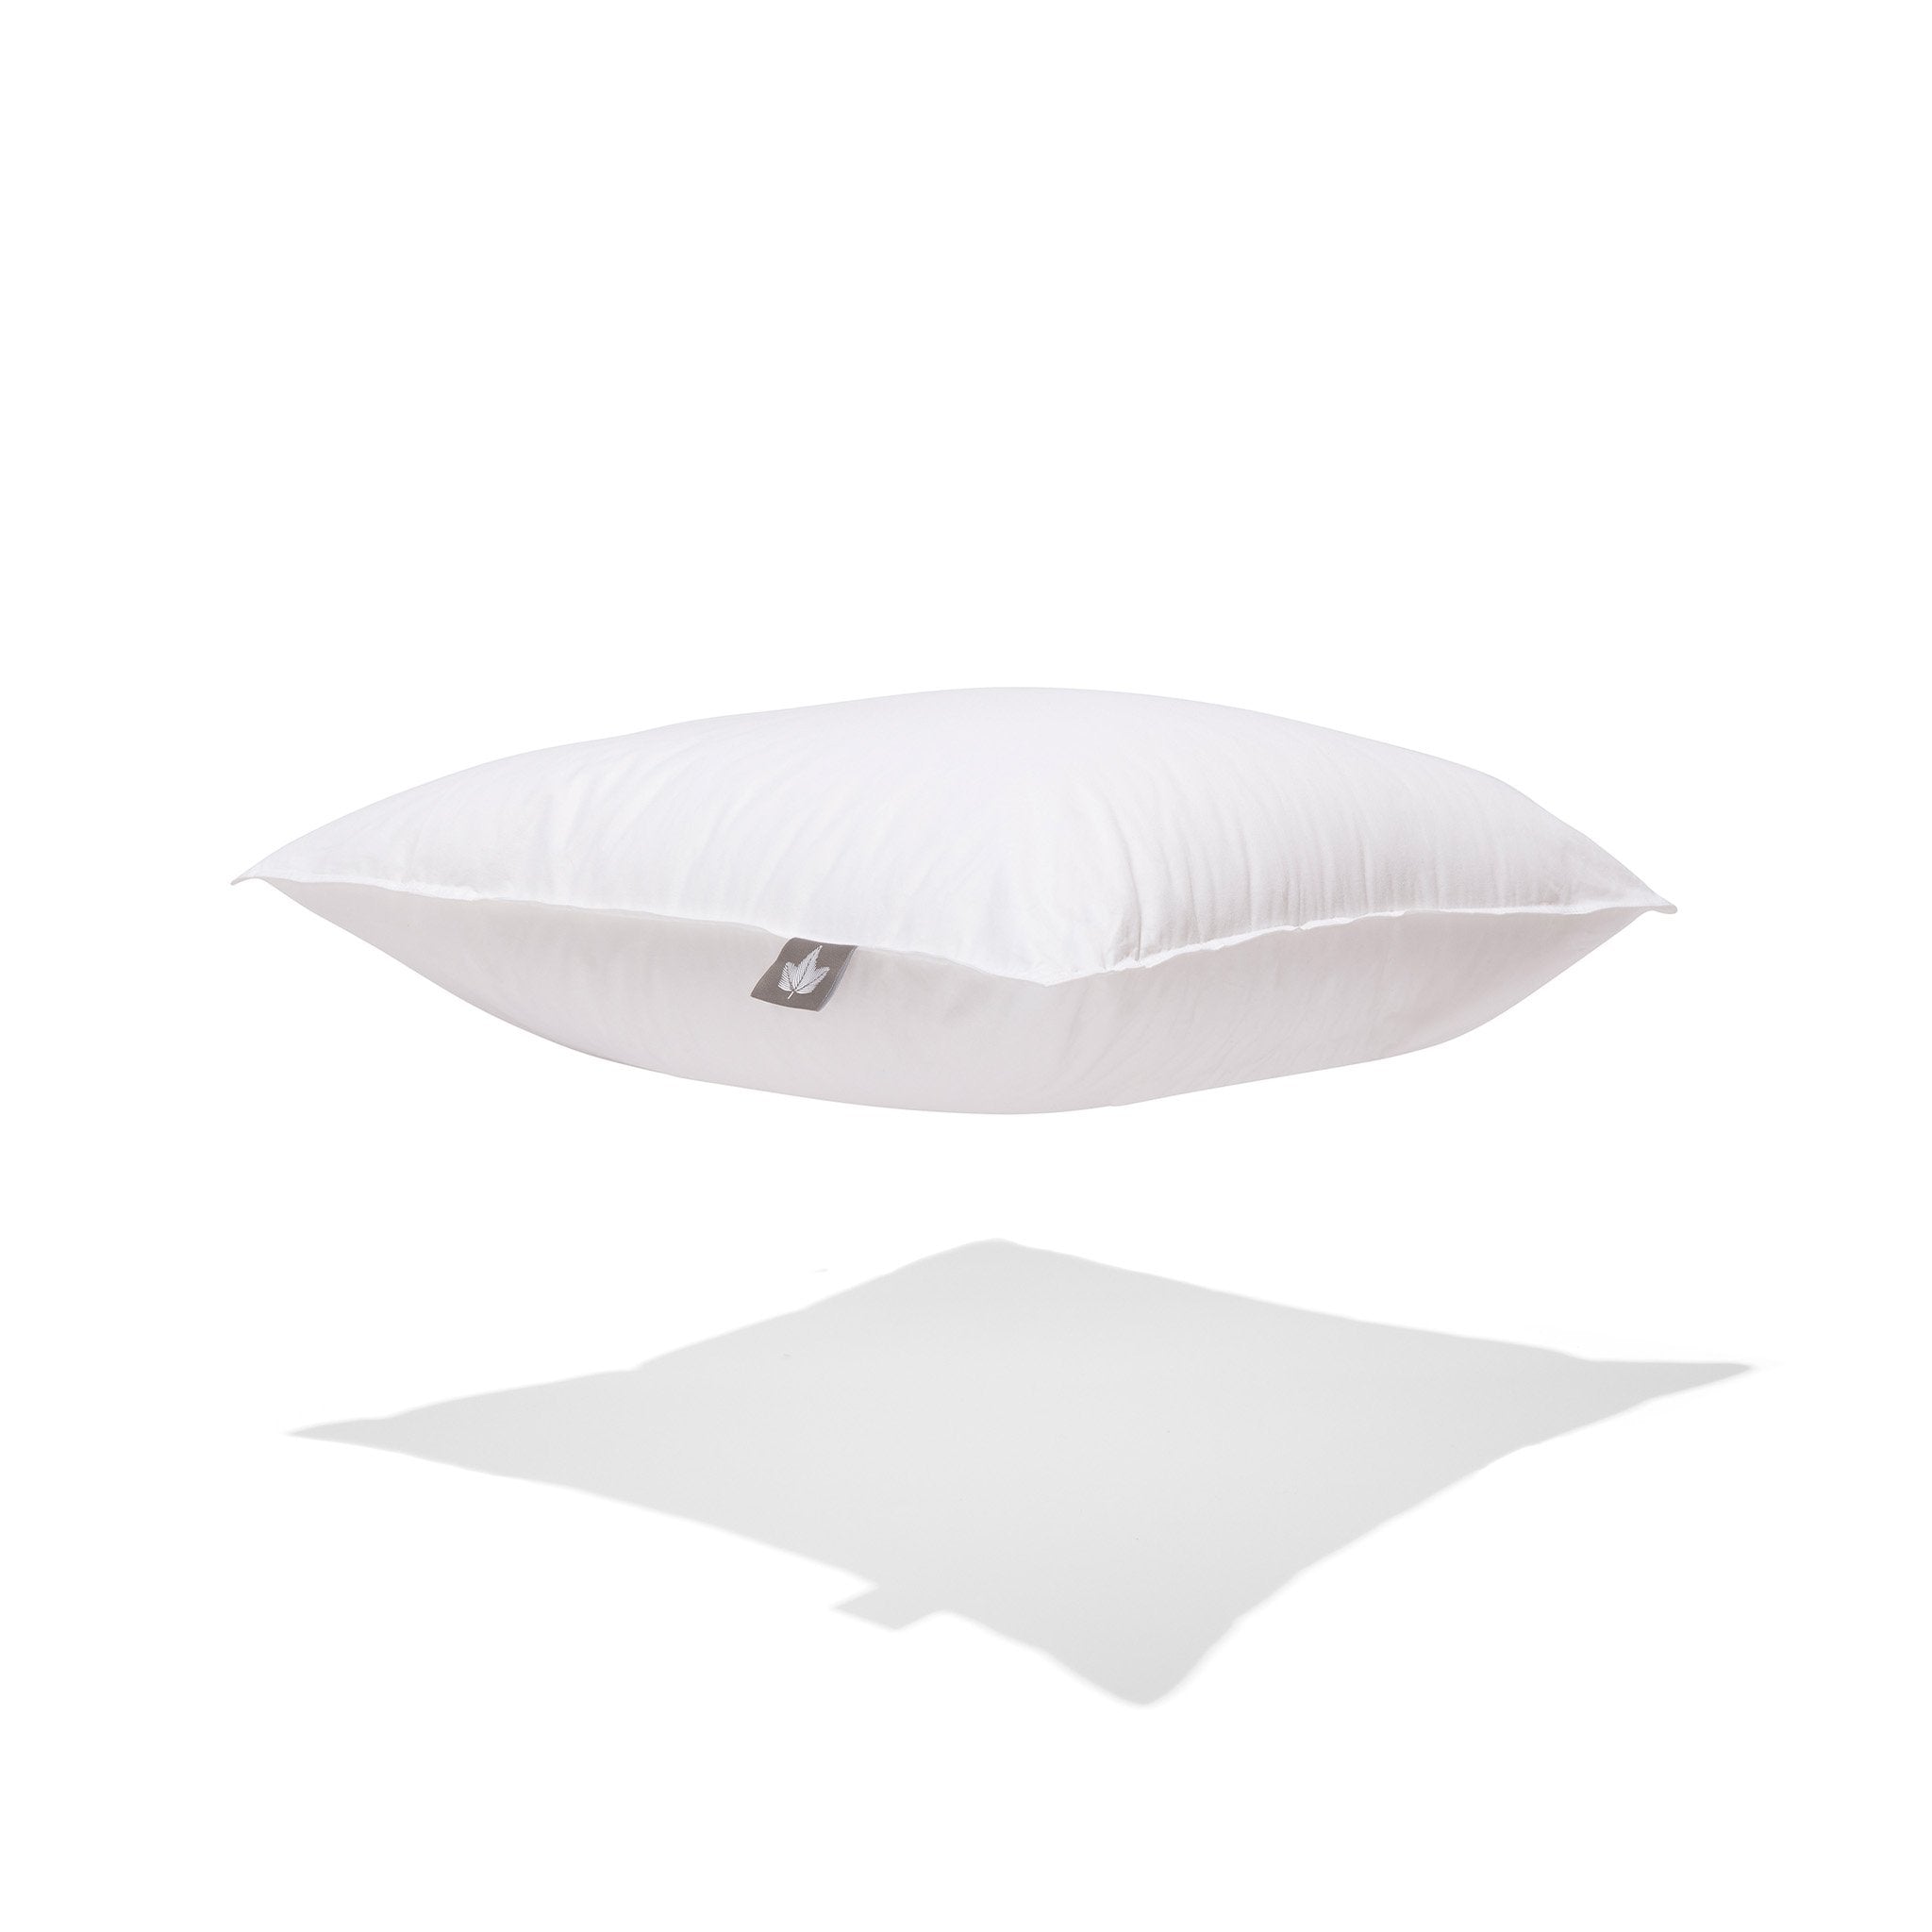 Is a Gel Fiber Pillow Superior to a Genuine Down Pillow? - Hullo